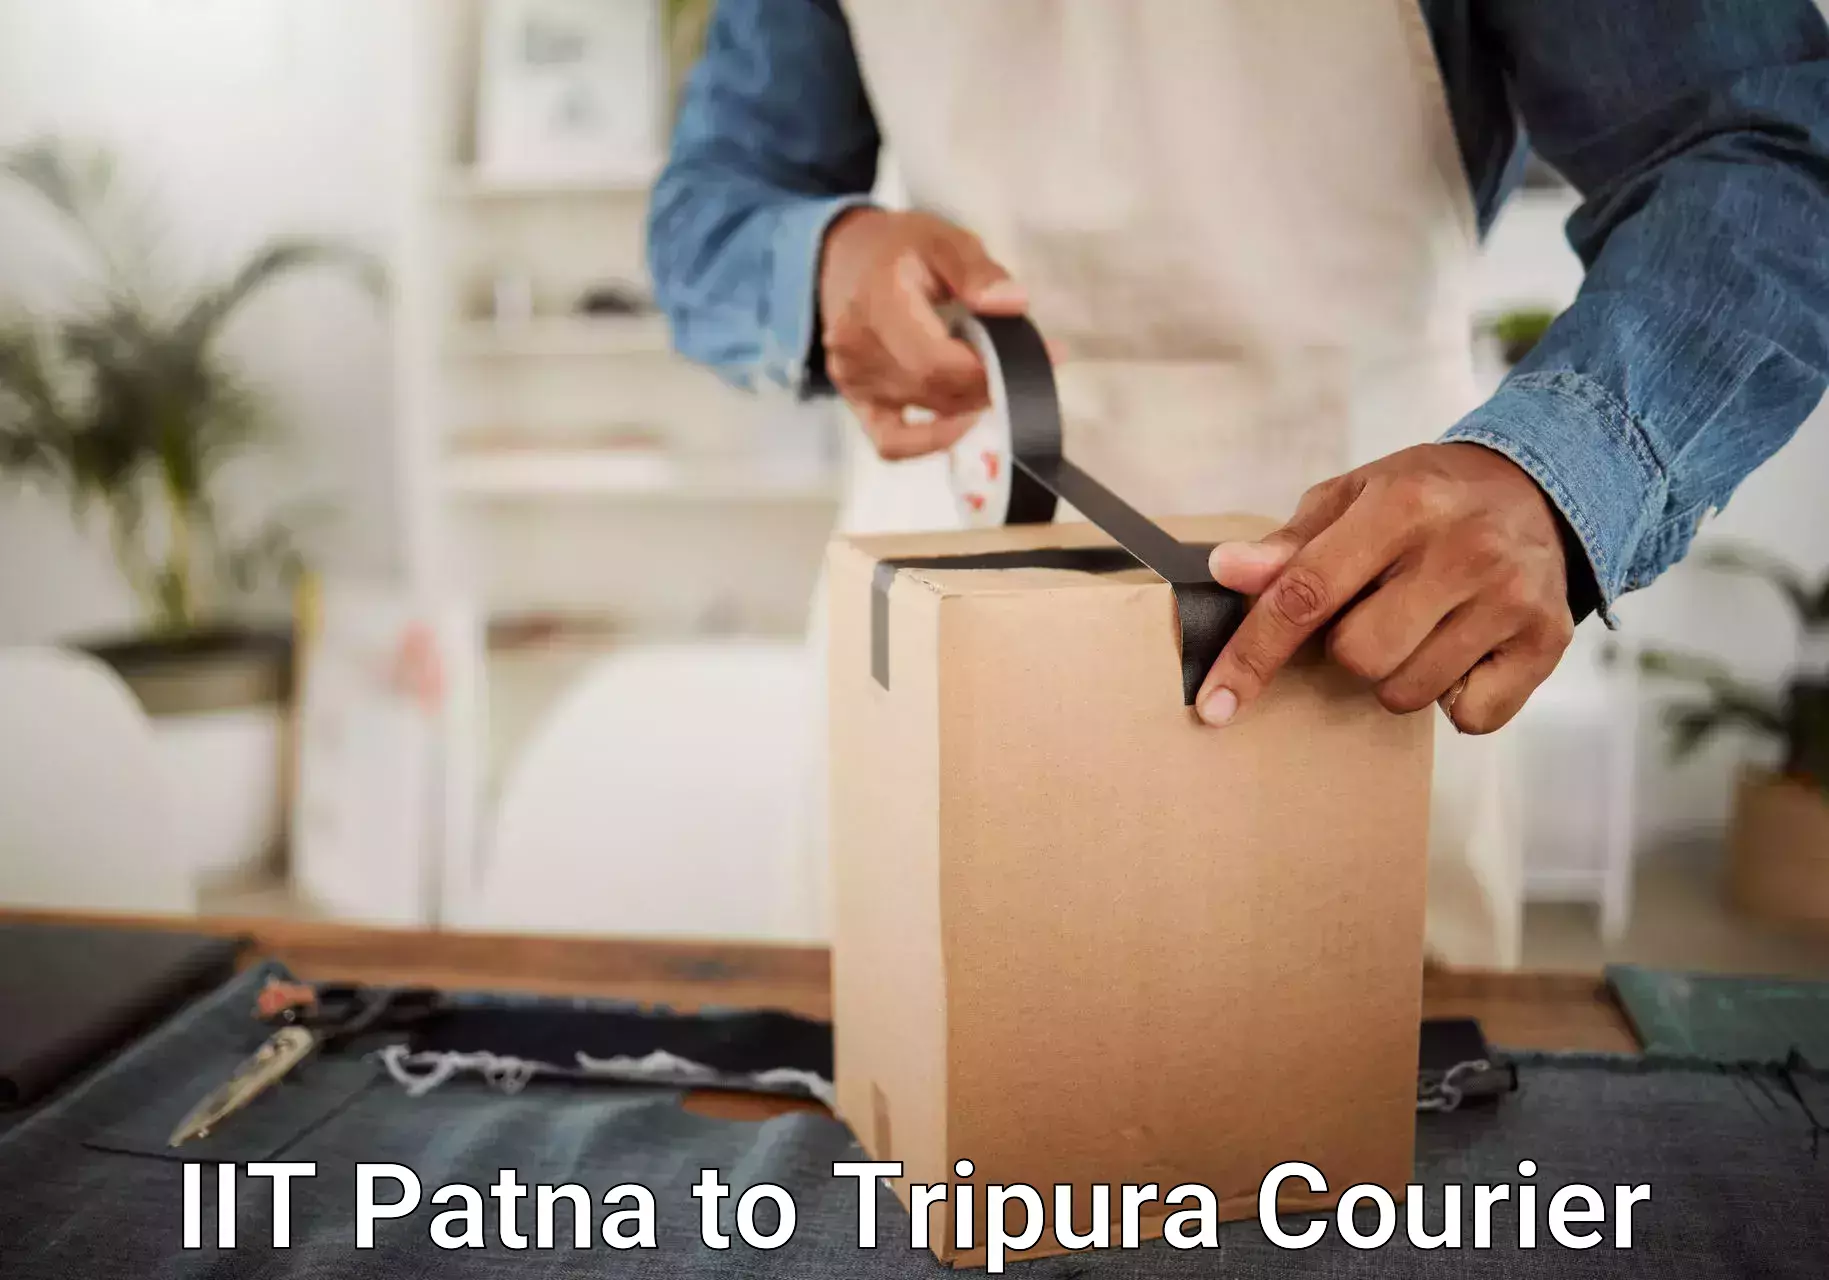 Direct baggage courier IIT Patna to Udaipur Tripura